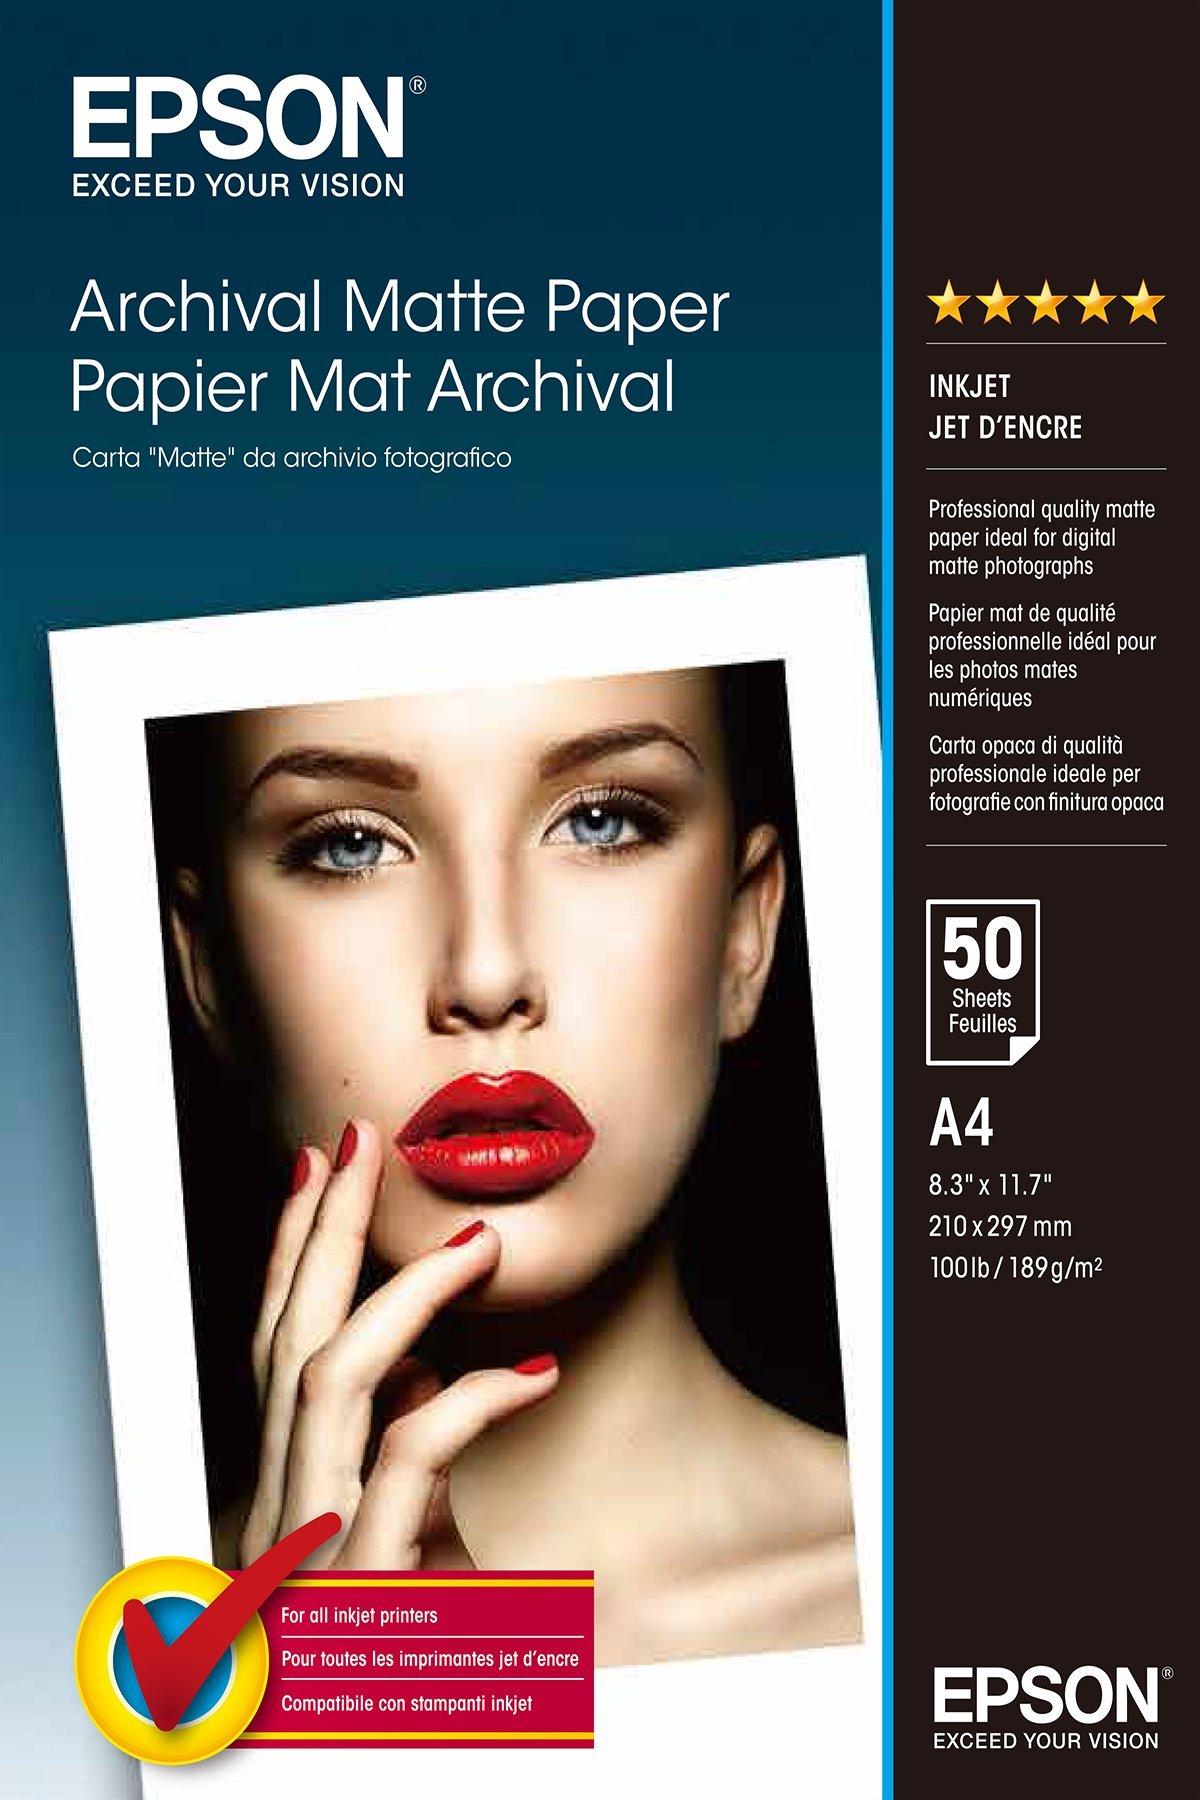 Archival Matte Paper - A4 - 50 Sheets, Paper and Media, Ink & Paper, Products